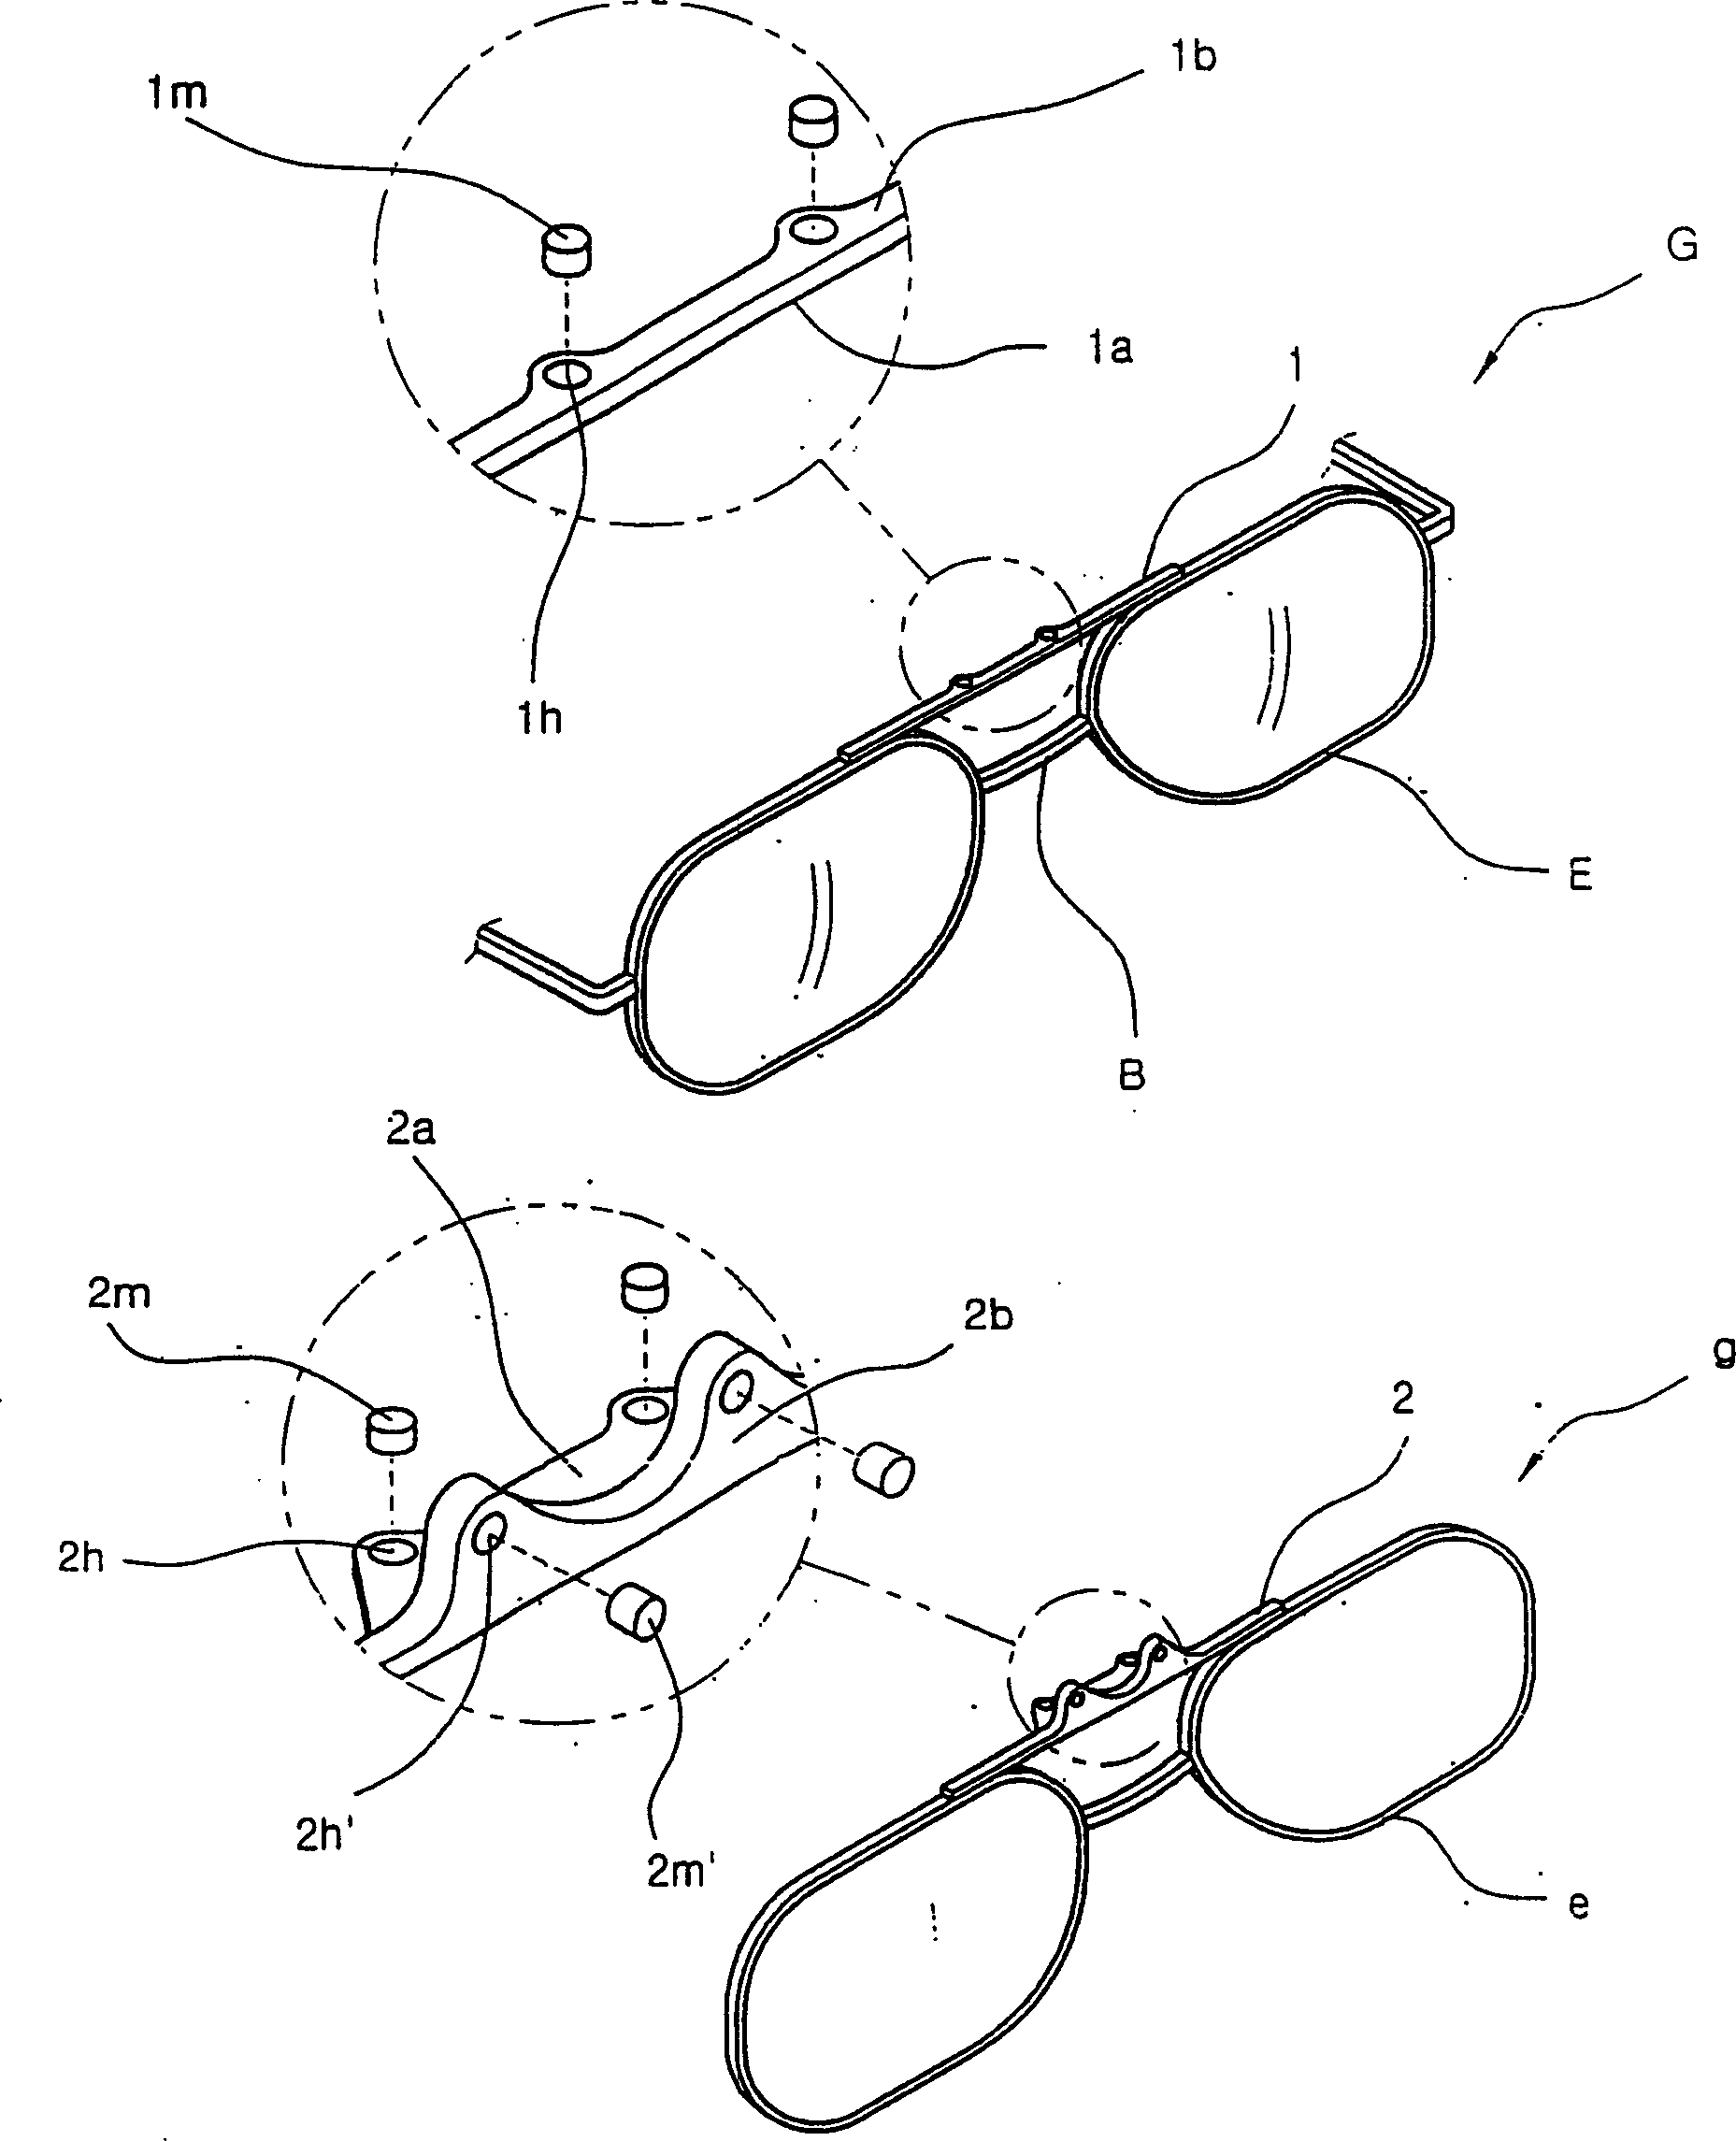 Eyeglasses having anxiliary glasses, which are easily detachable and opened in front using magnet